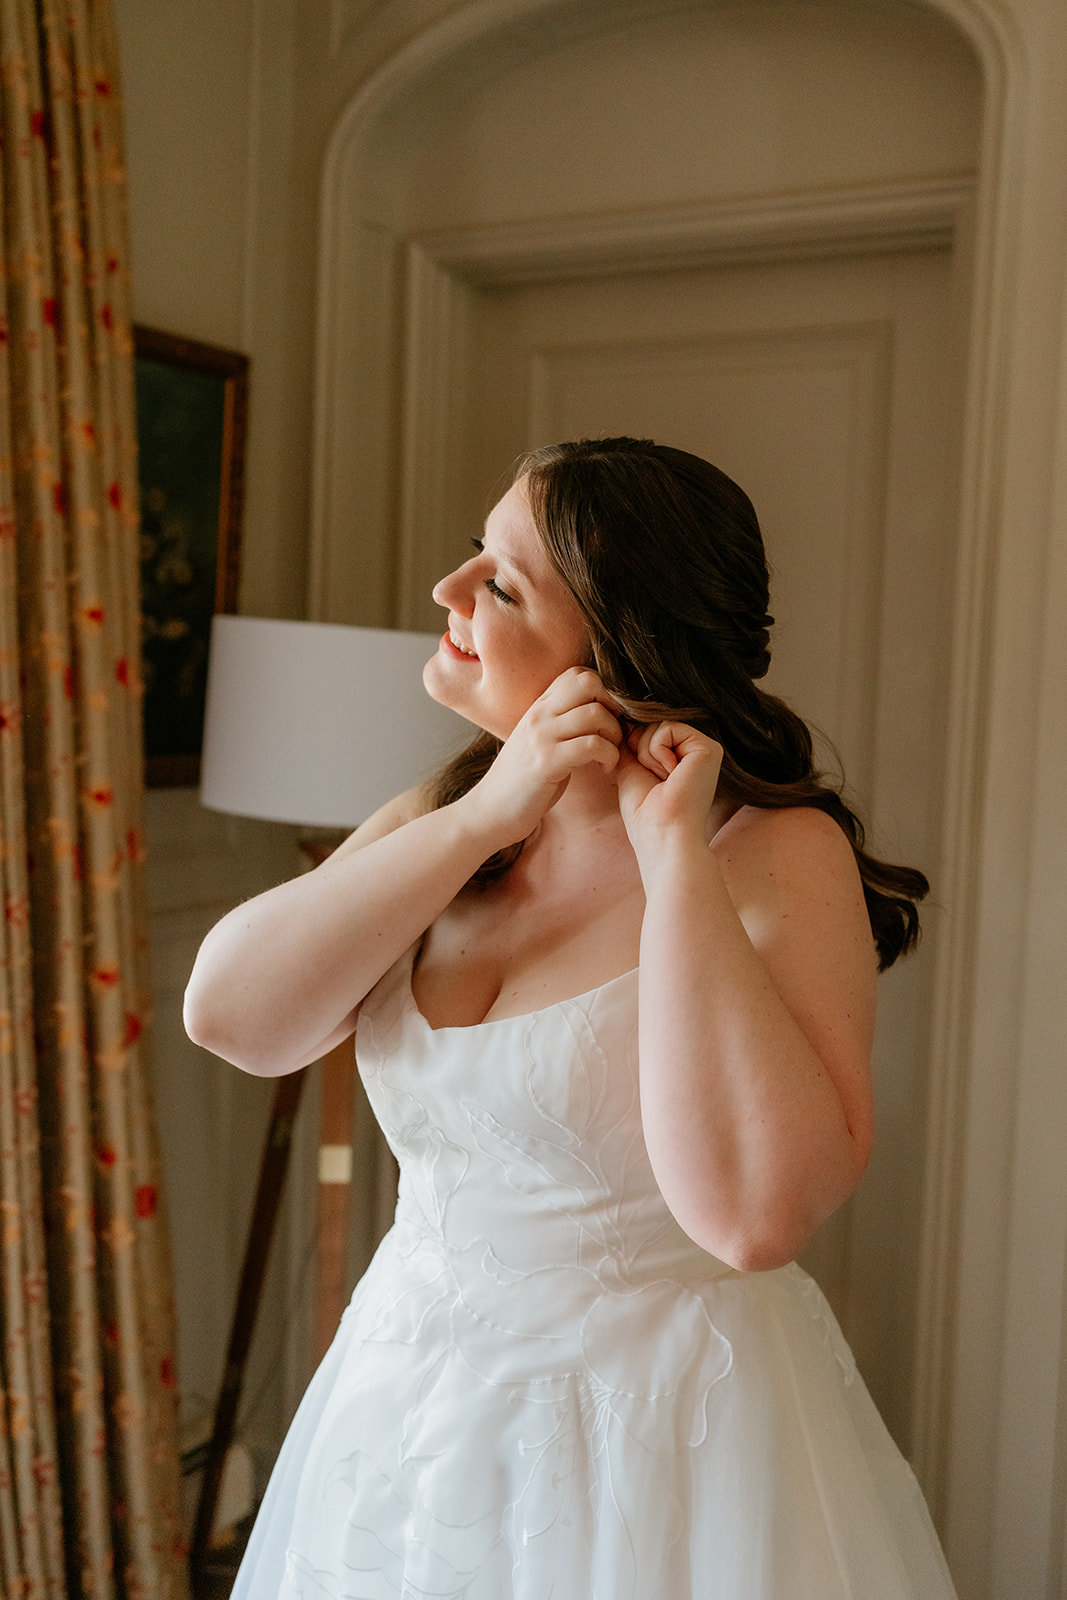 A bride in a white dress fastens her earring while smiling and looking to the side in a well-lit room.